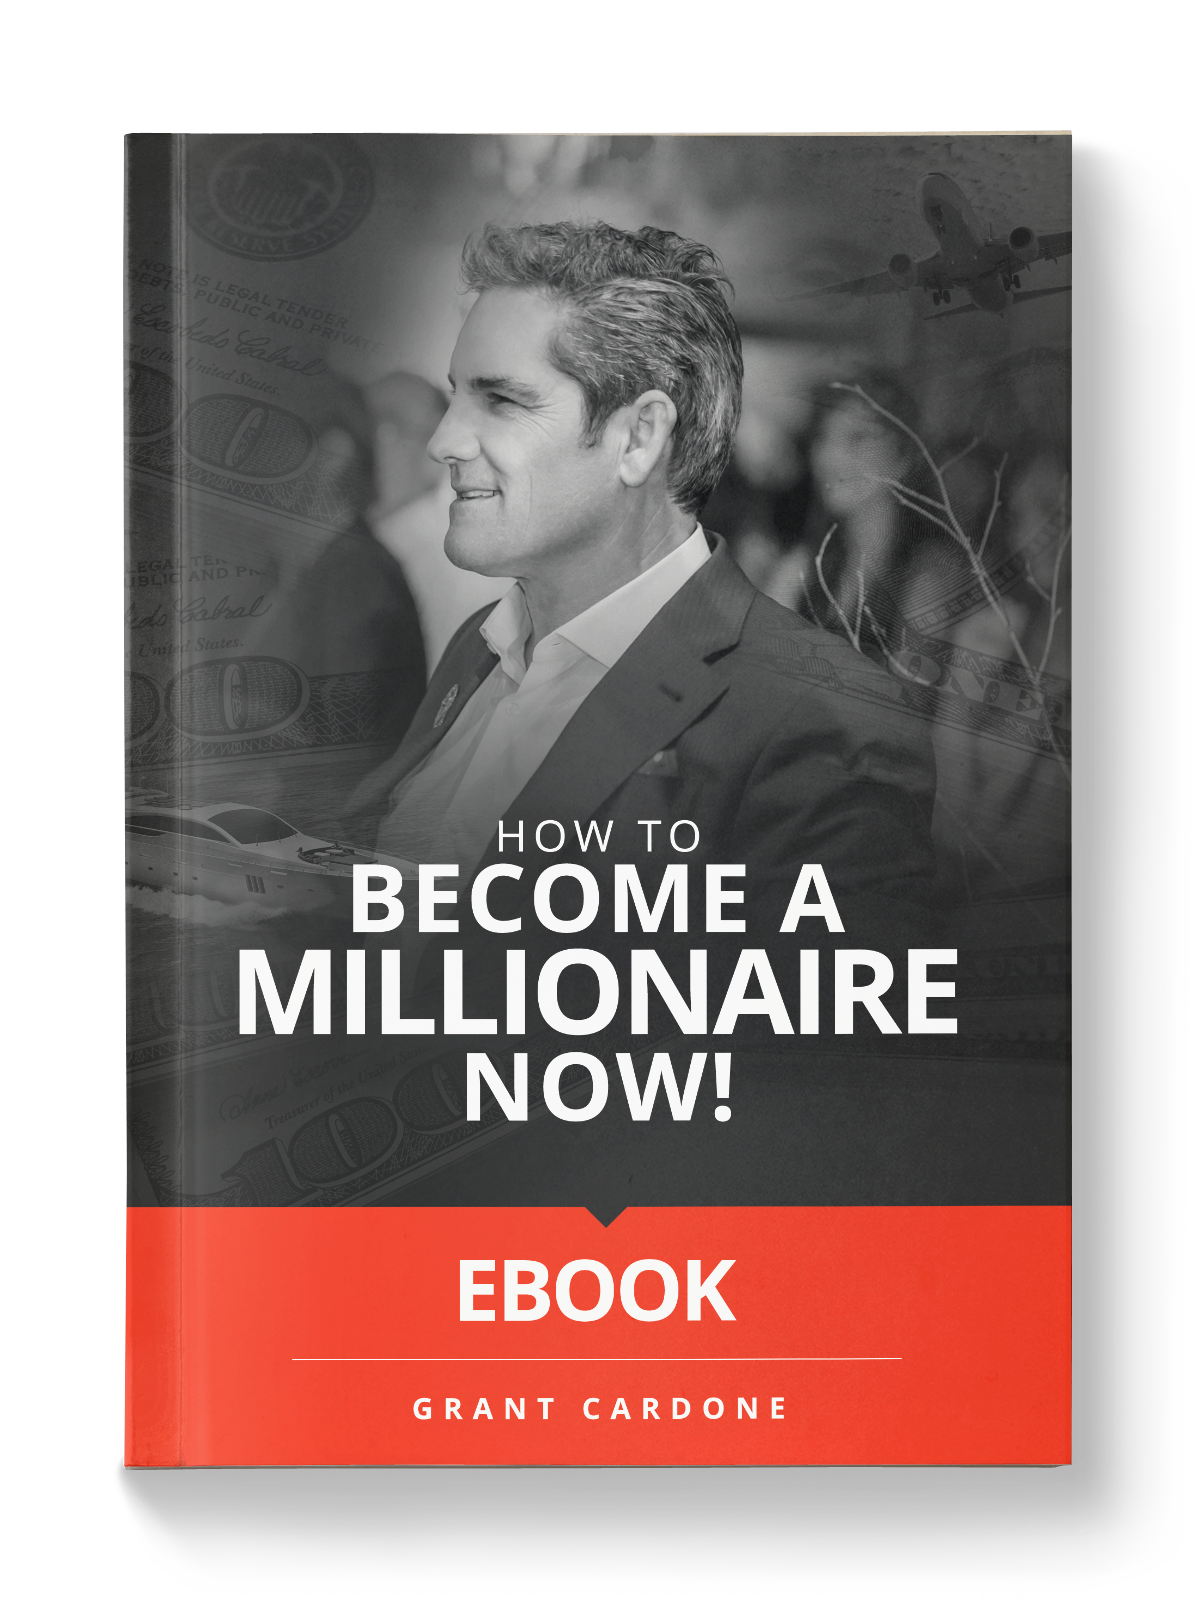 How to Become a Millionaire NOW - Grant Cardone